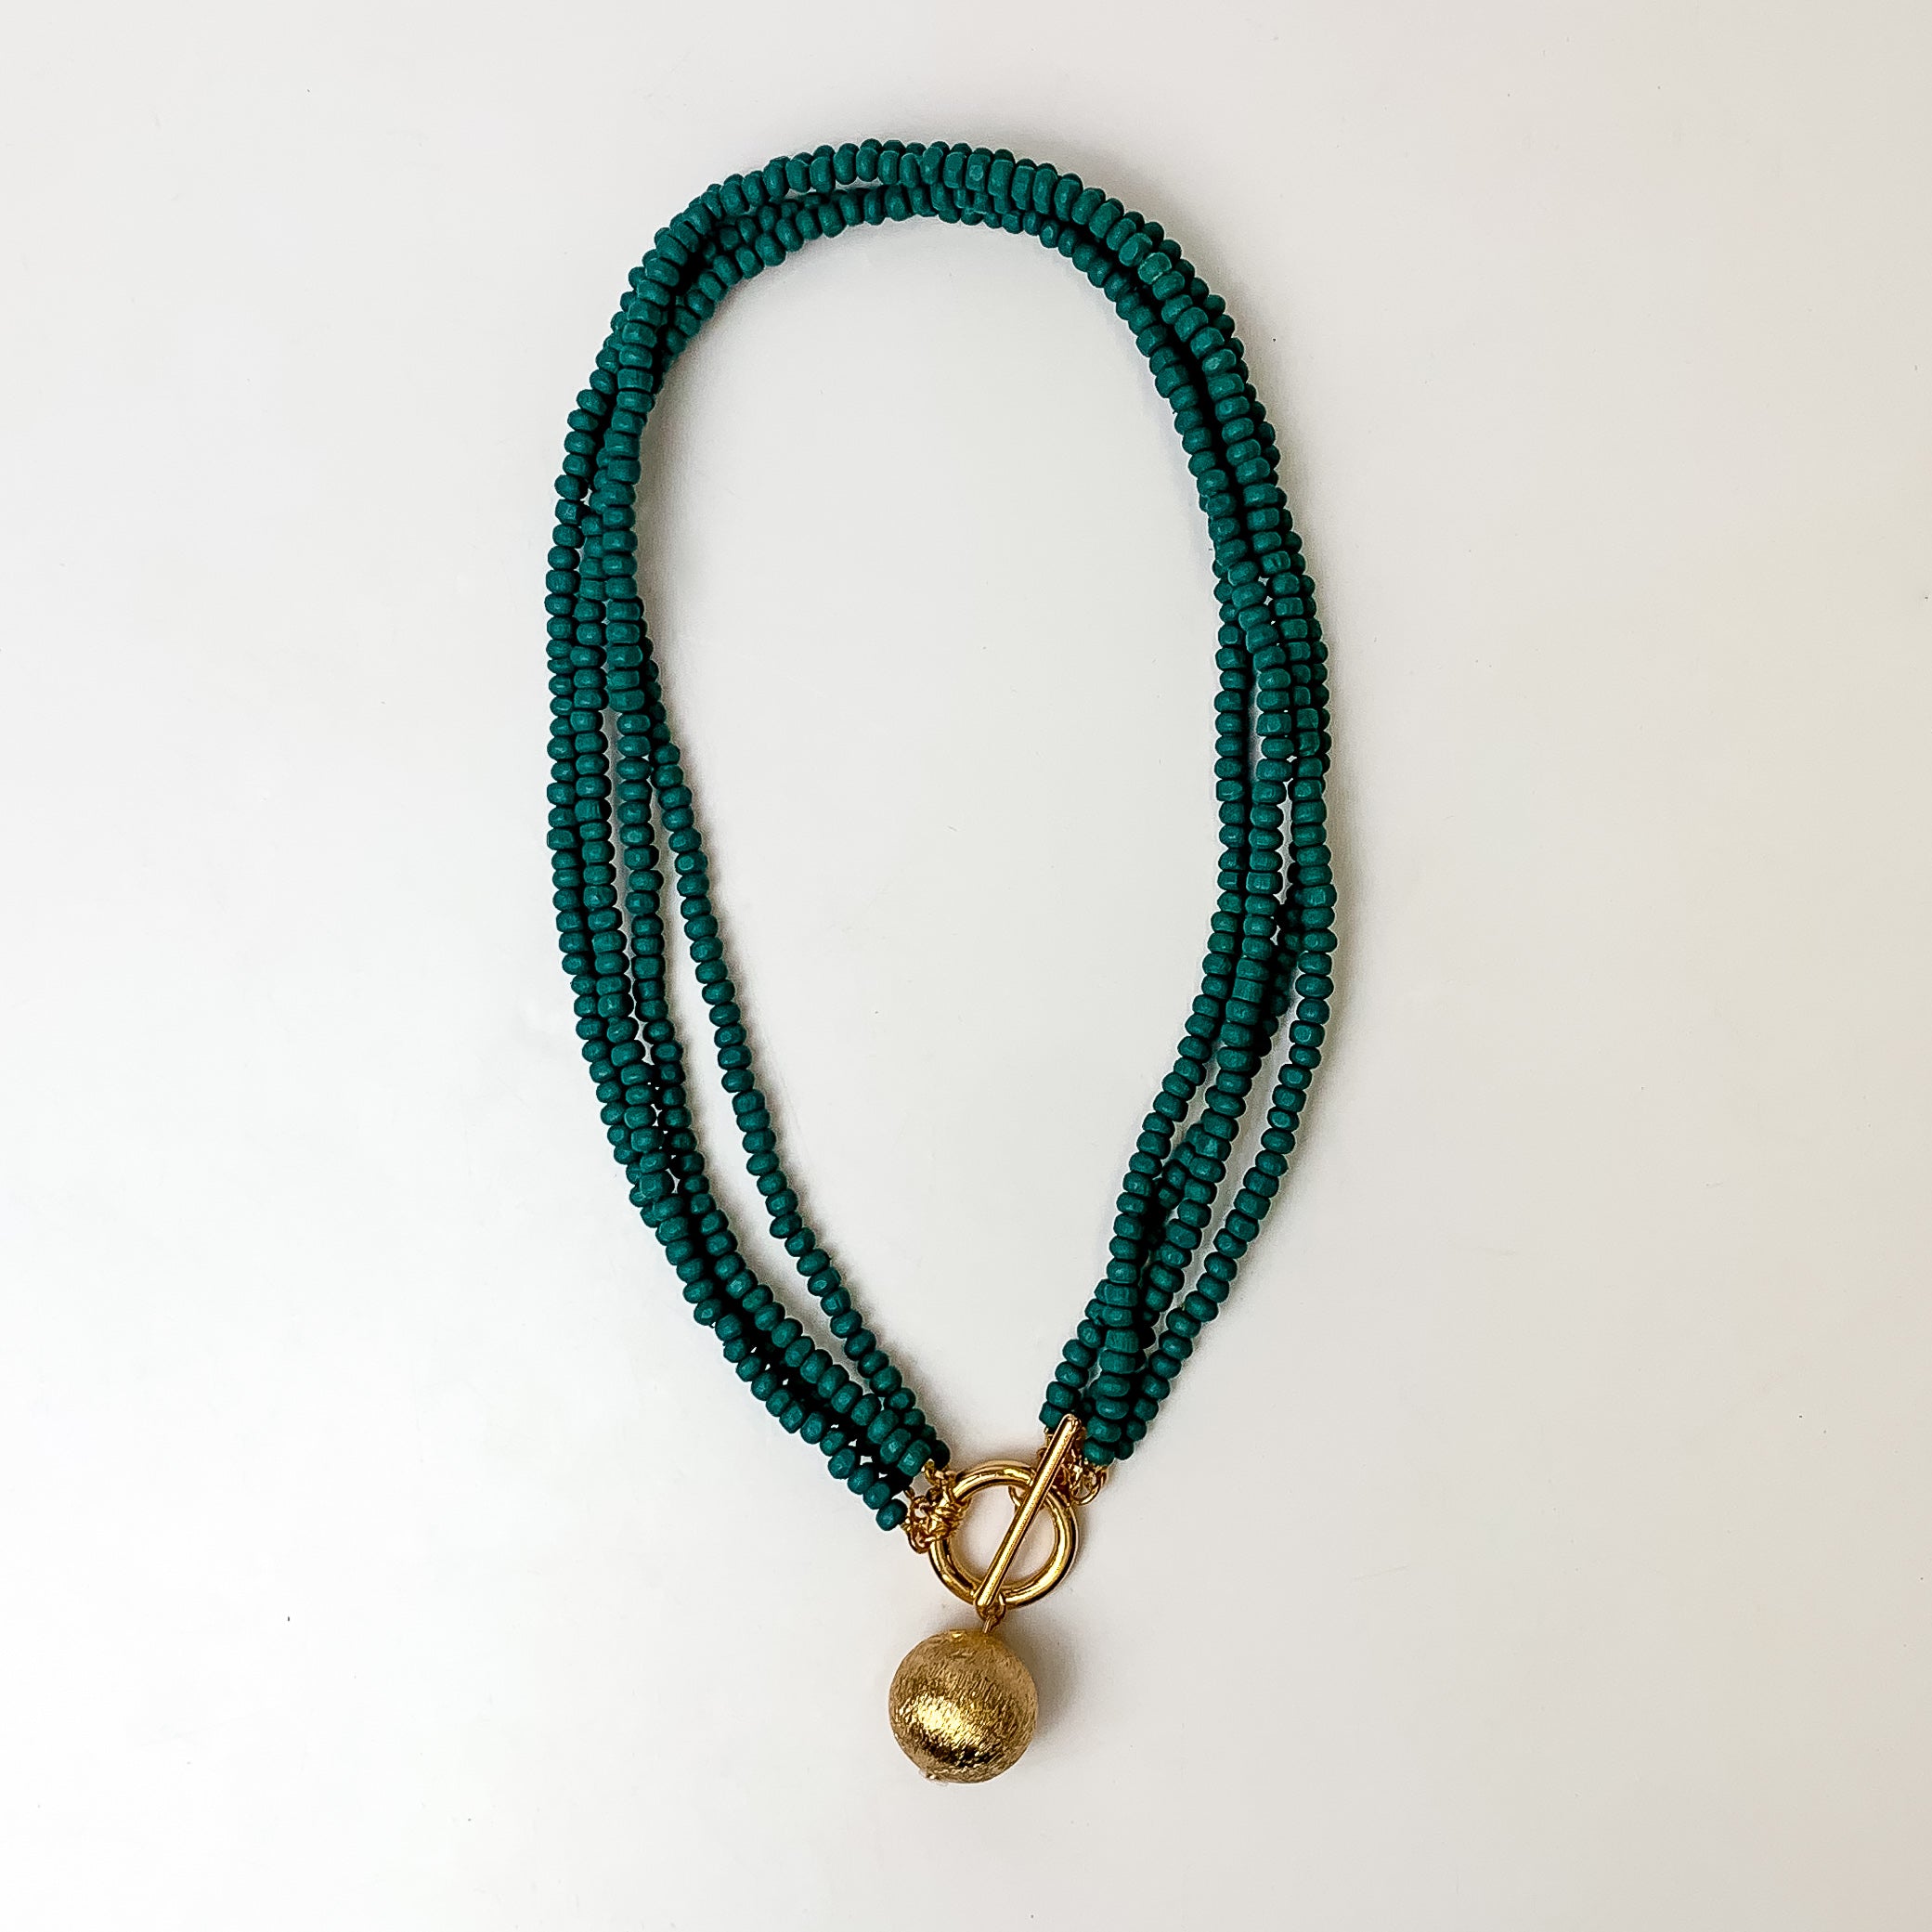 This beaded necklace has 4 strands and features a gold tone ball as the centerpiece. It is taken on a white background.